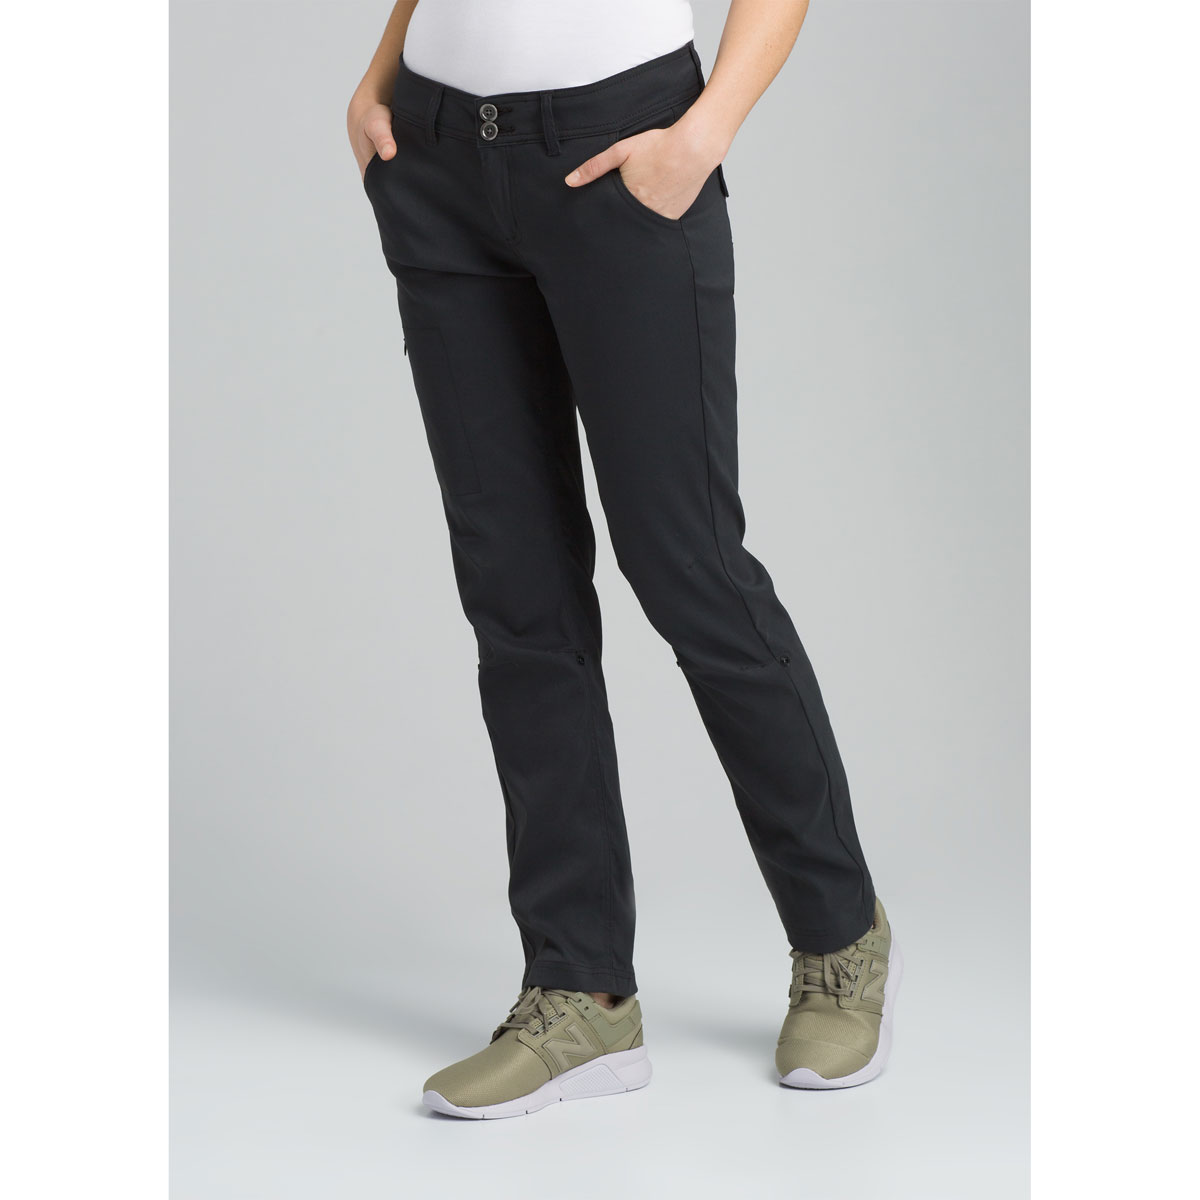 Halle Straight Pant - Women's (Fall 2021)